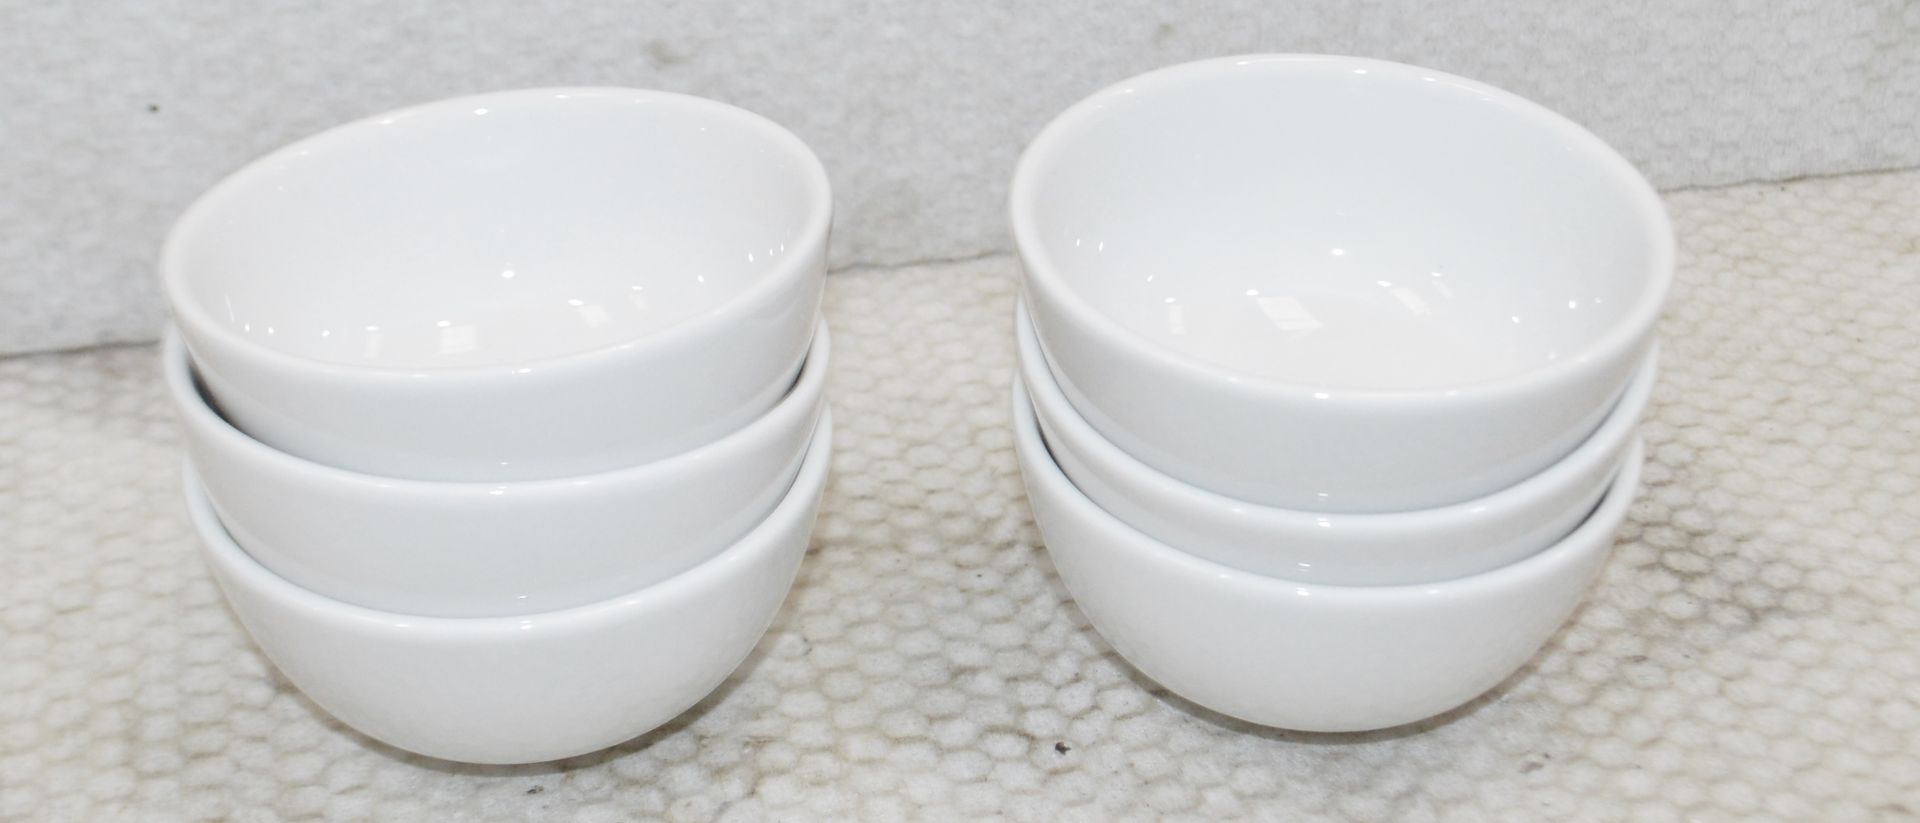 30 x Porcelite 11cm Rice Bowls - Recently Removed From A Commercial Restaurant Environment - CL011 - - Image 2 of 3